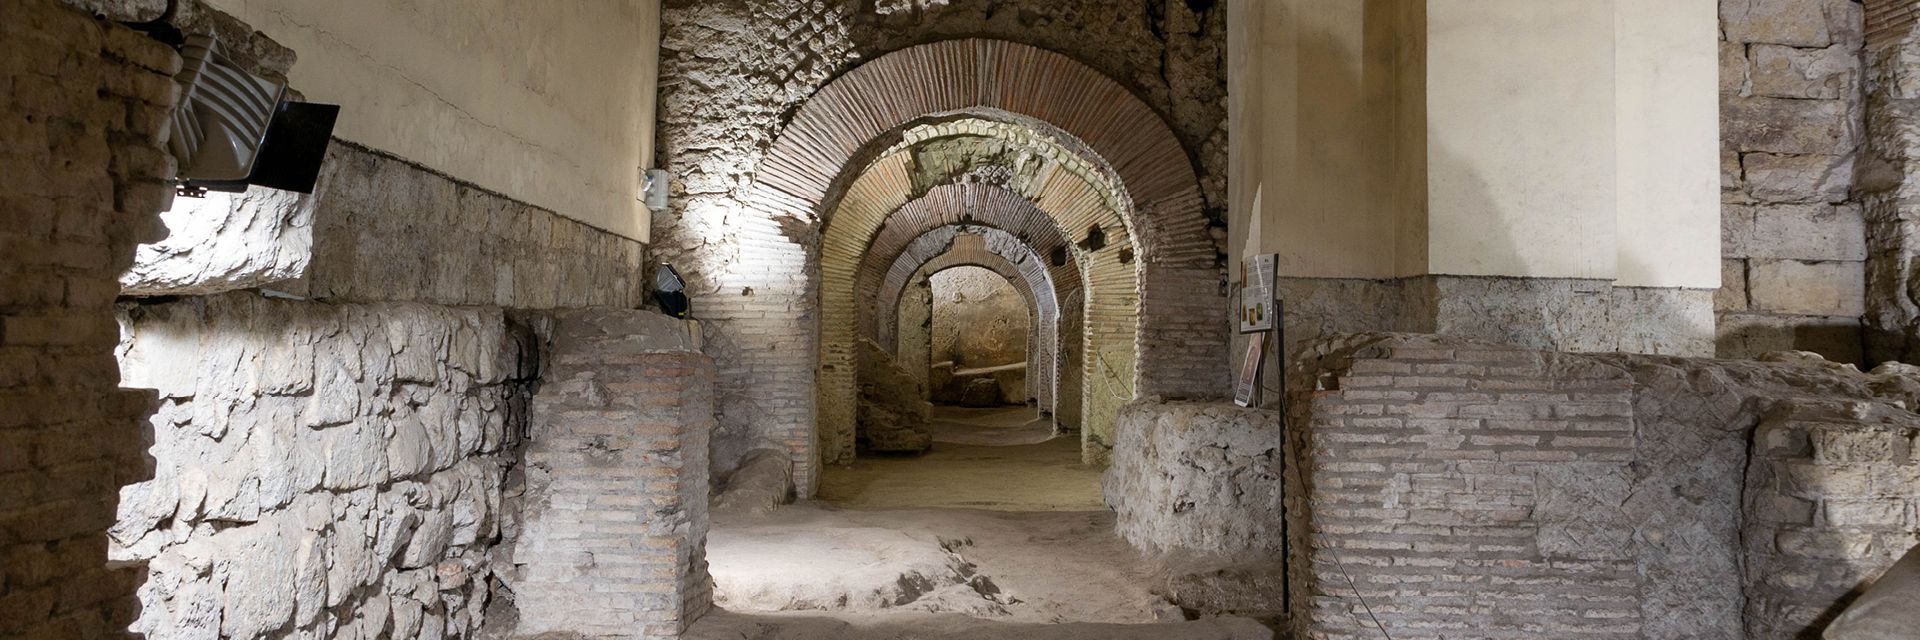 Museum of the work of San Lorenzo Maggiore and Archaeological Excavations